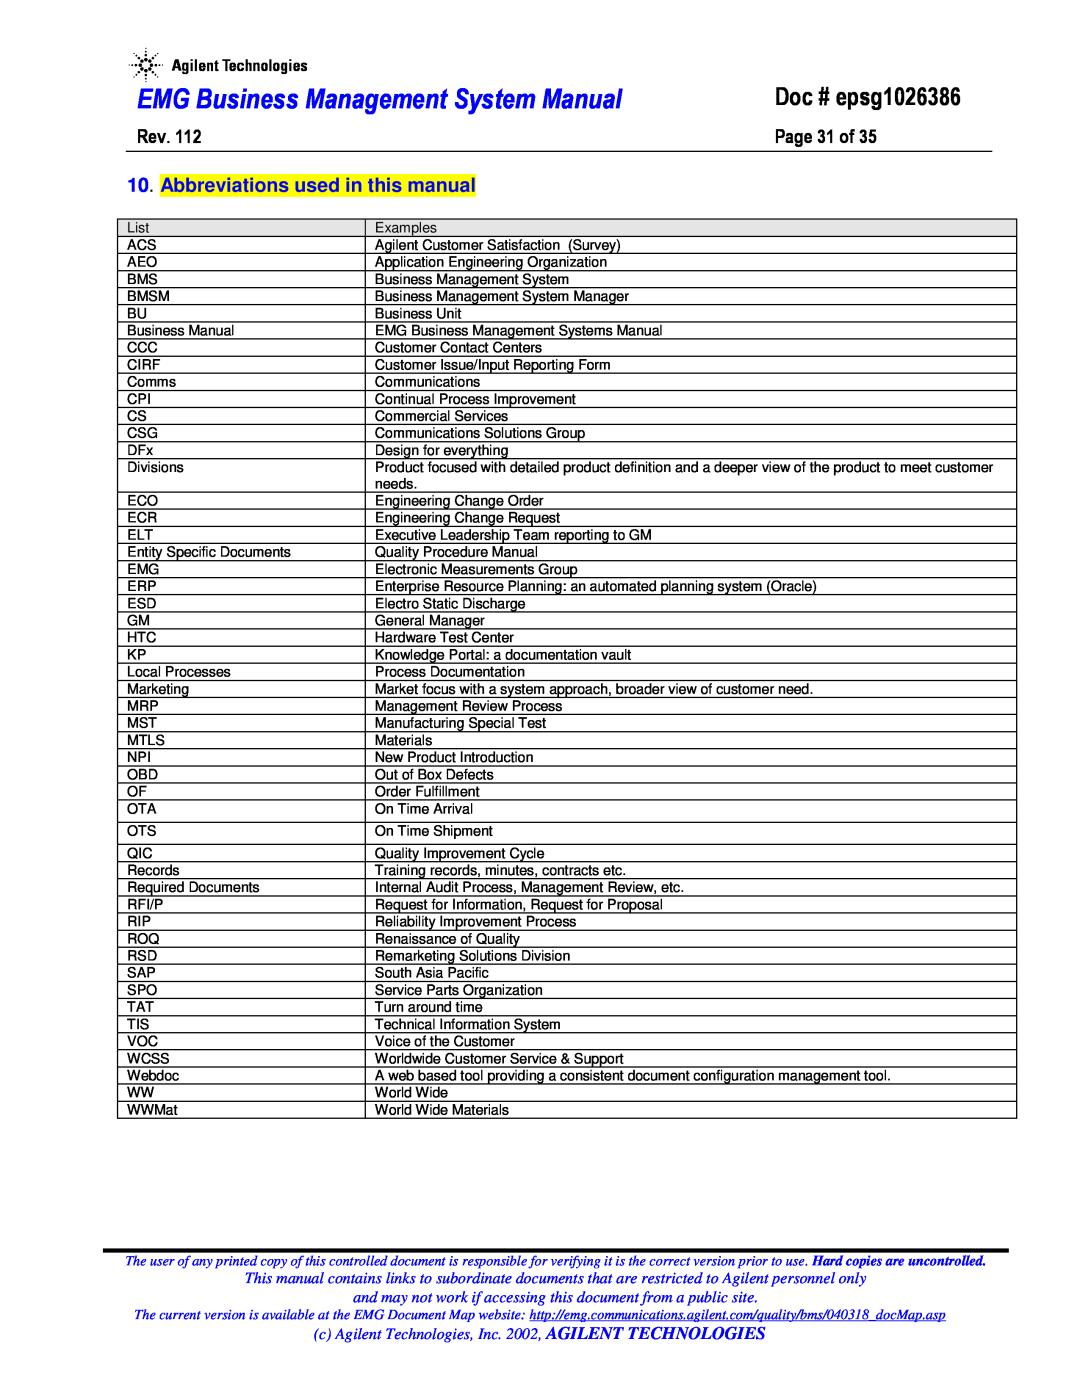 Agilent Technologies epsg1026386 Page 31 of, Abbreviations used in this manual, EMG Business Management System Manual 